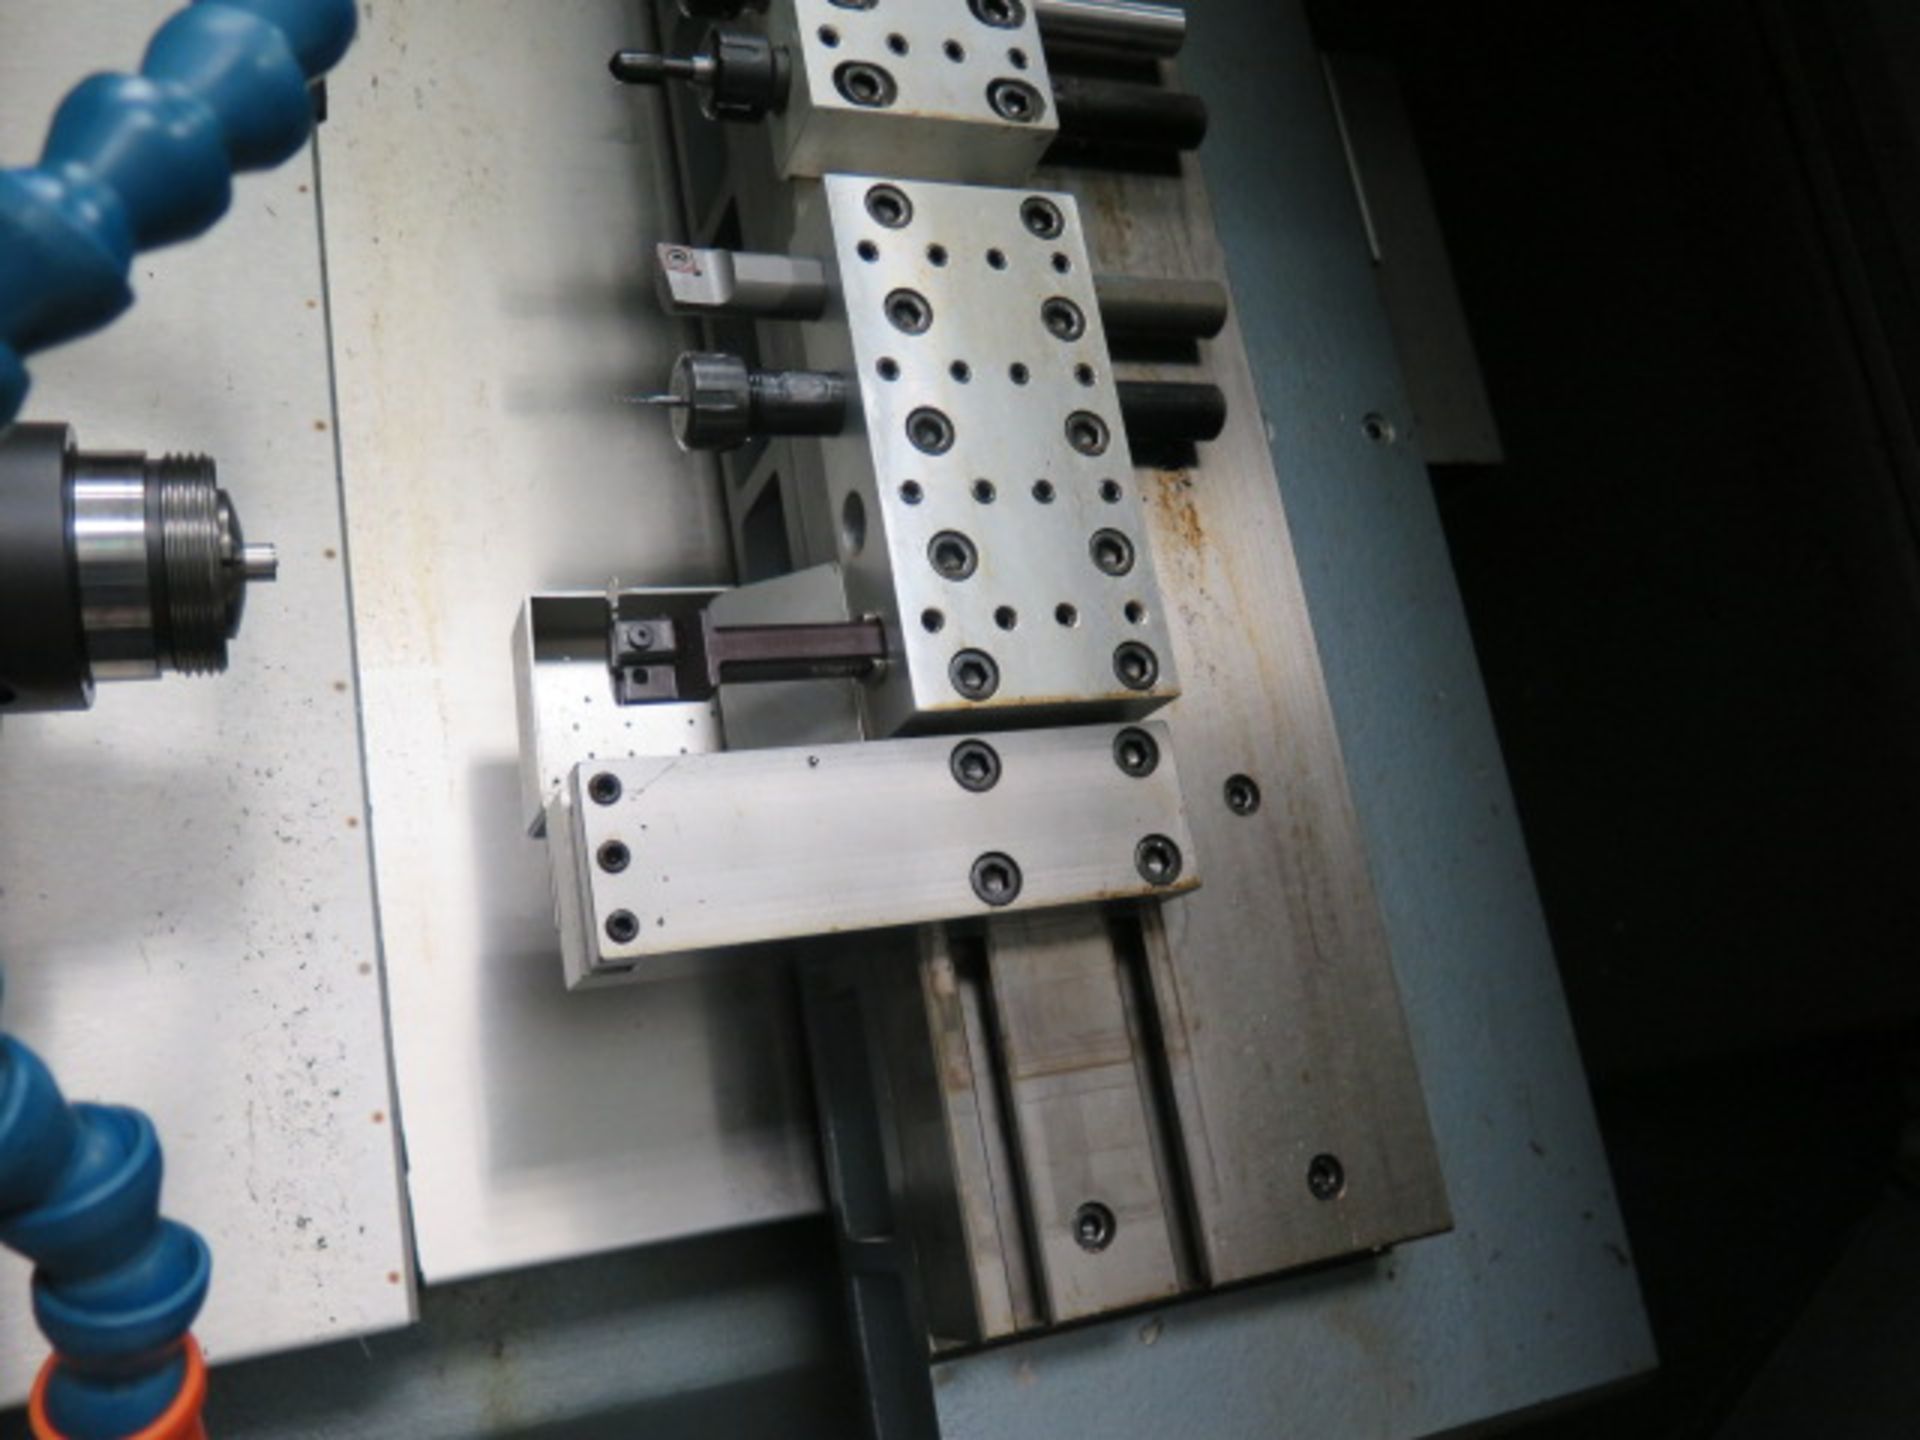 CMS mdl. GTD CNC Cross Slide Lathe w/ Fagor CNC Controls, 6000 RPM, 5C Collet Closer, SOLD AS IS - Image 10 of 14